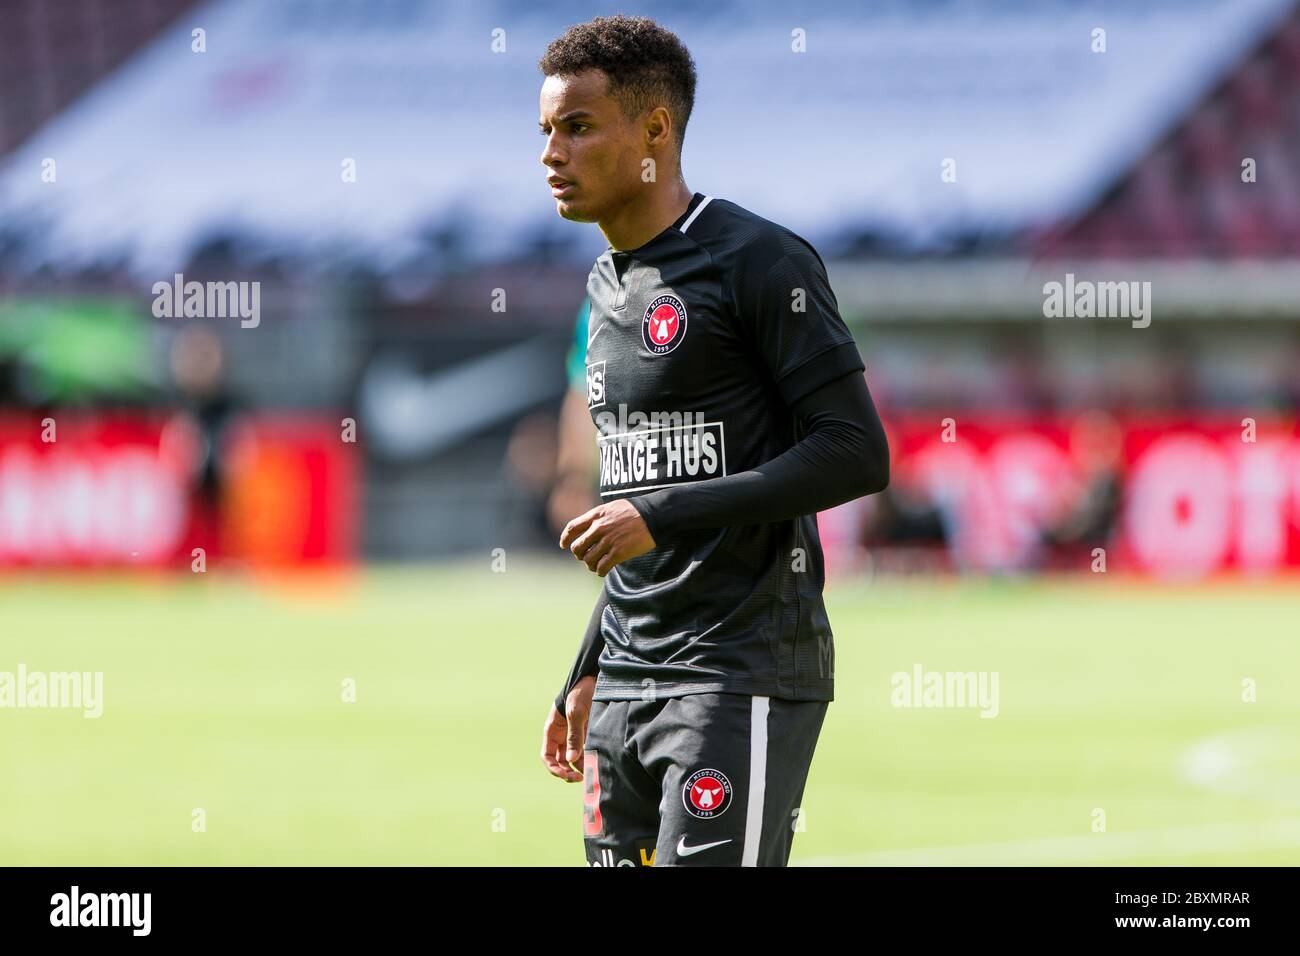 Farum Denmark 07th June 2020 Paulinho 29 Of Fc Midtjylland Seen During The 3f Superliga Match Between Fc Nordsjaelland And Fc Midtjylland At Right To Dream Park In Farum Photo Credit Gonzales